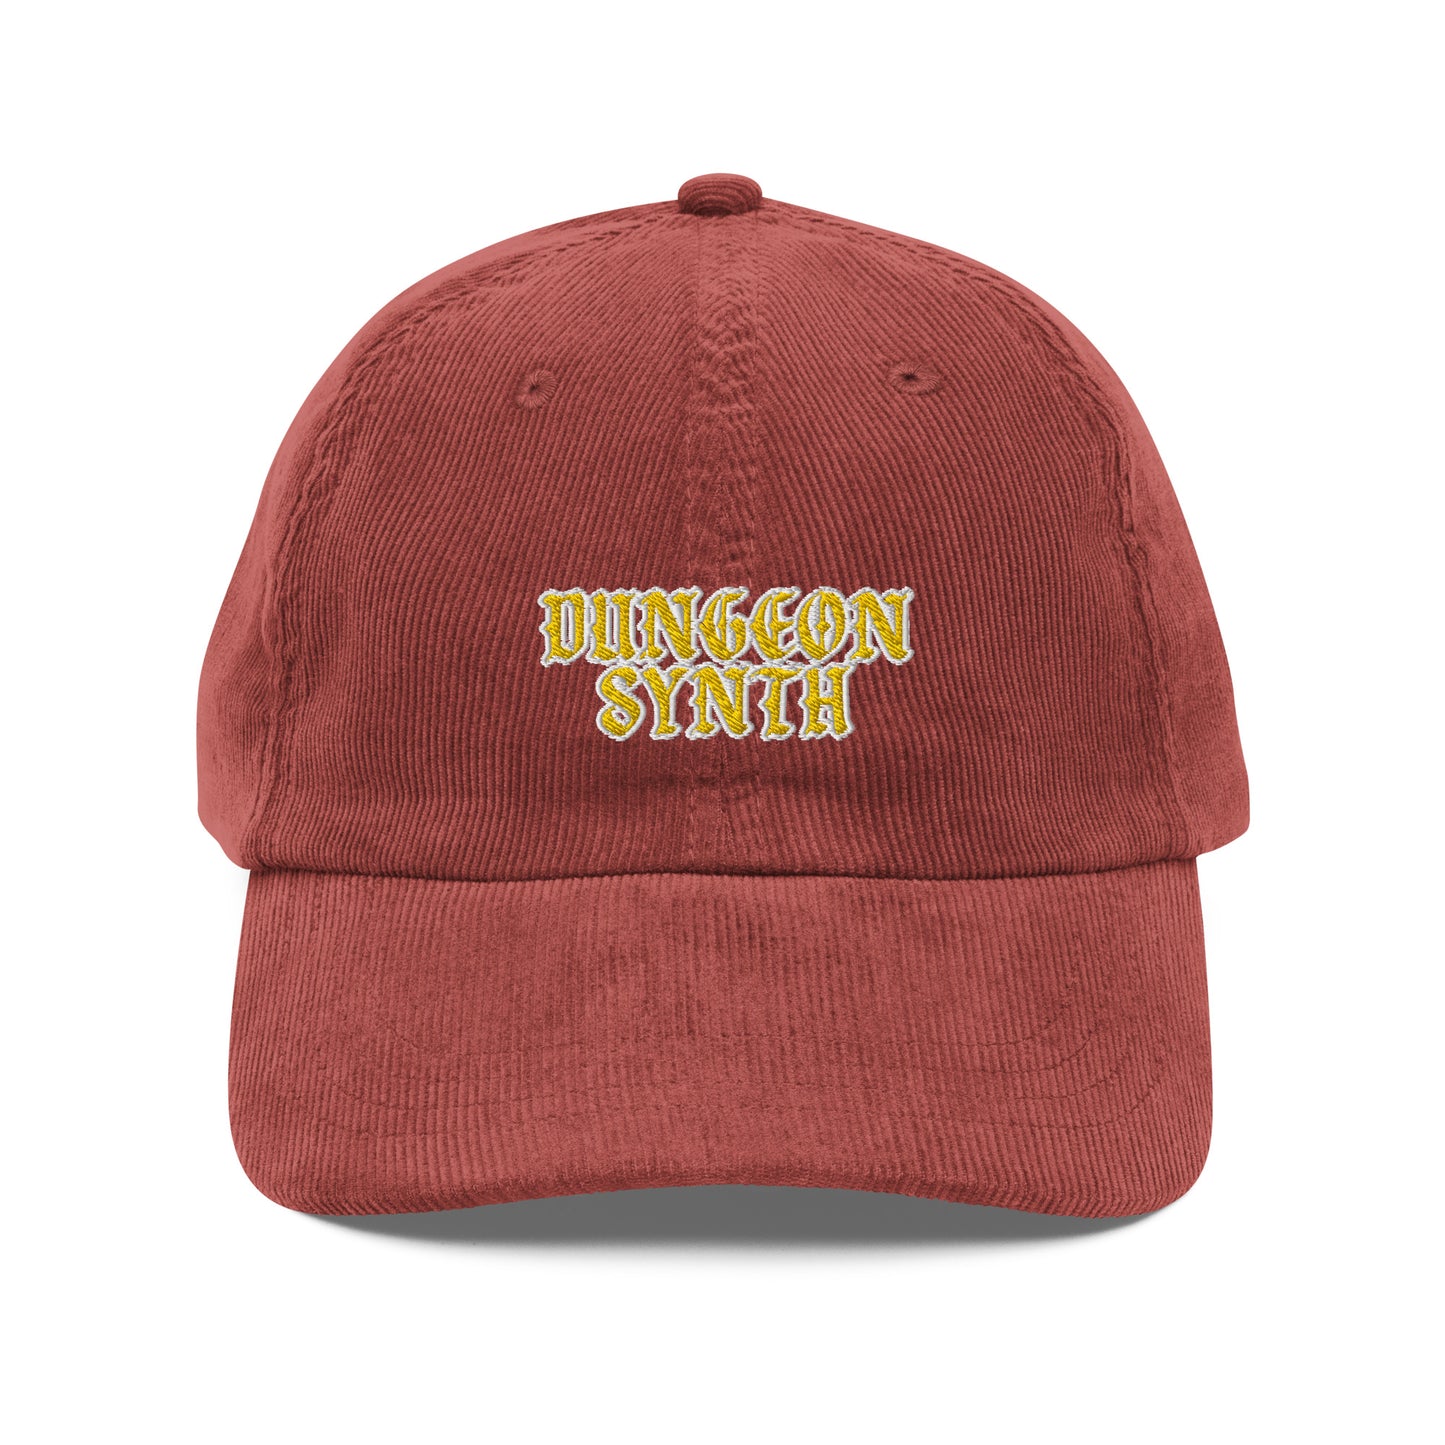 Dungeon Synth Vintage Corduroy Cap (2 color options)